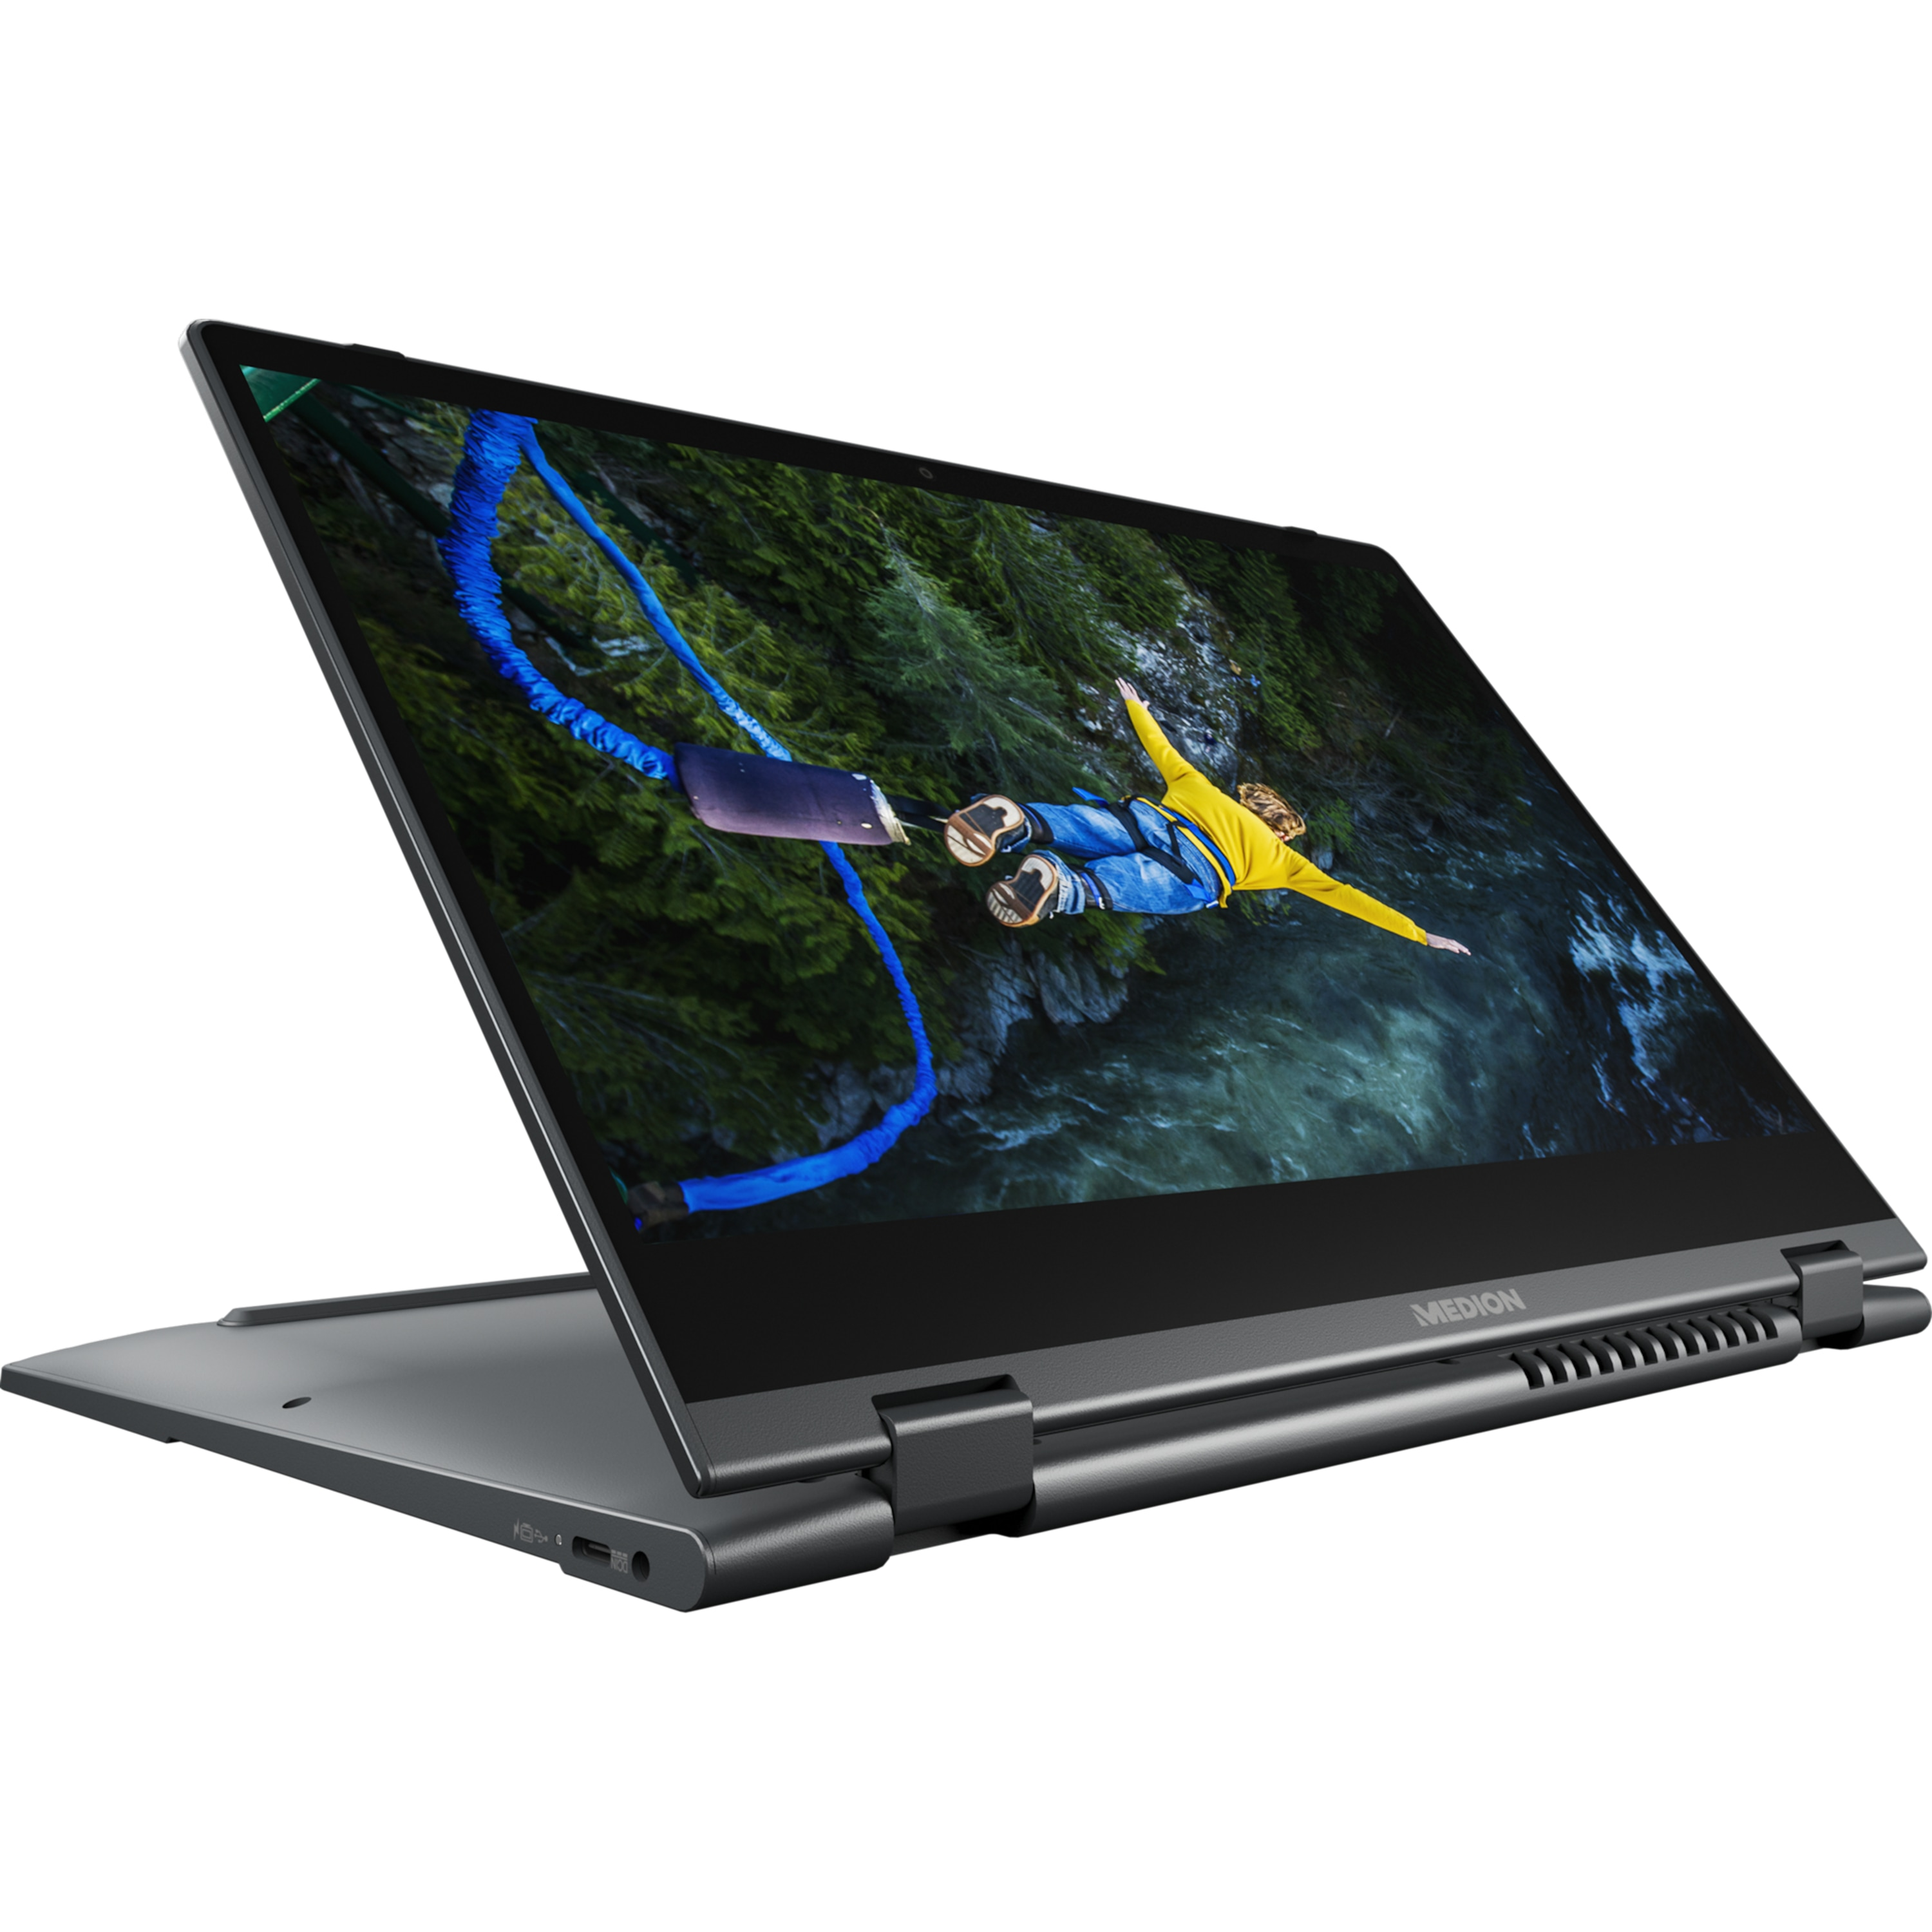 E14413 Touchscreen, Display, Prozessor, Convertible Touch 512 GB mit Zoll MEDION RAM, Notebook i3 14 Intel® Display blau 8 Core™ SSD, GB